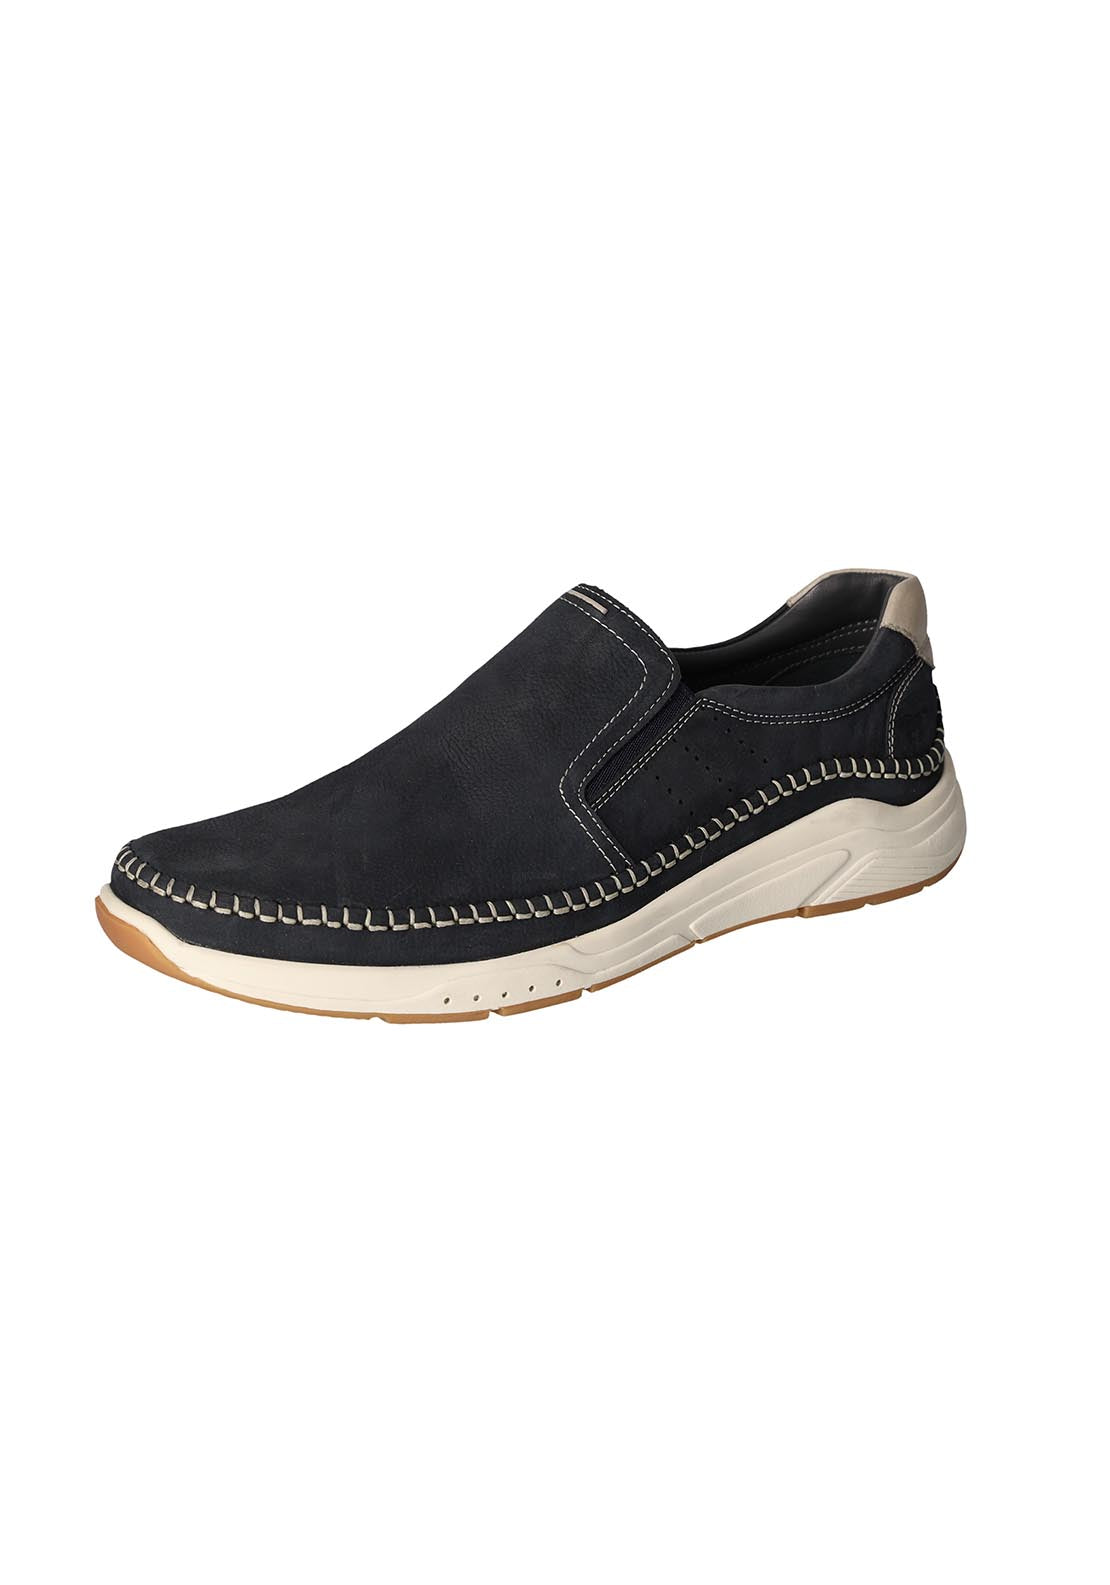 Mustang Slip-On Casual Shoe - Navy 1 Shaws Department Stores